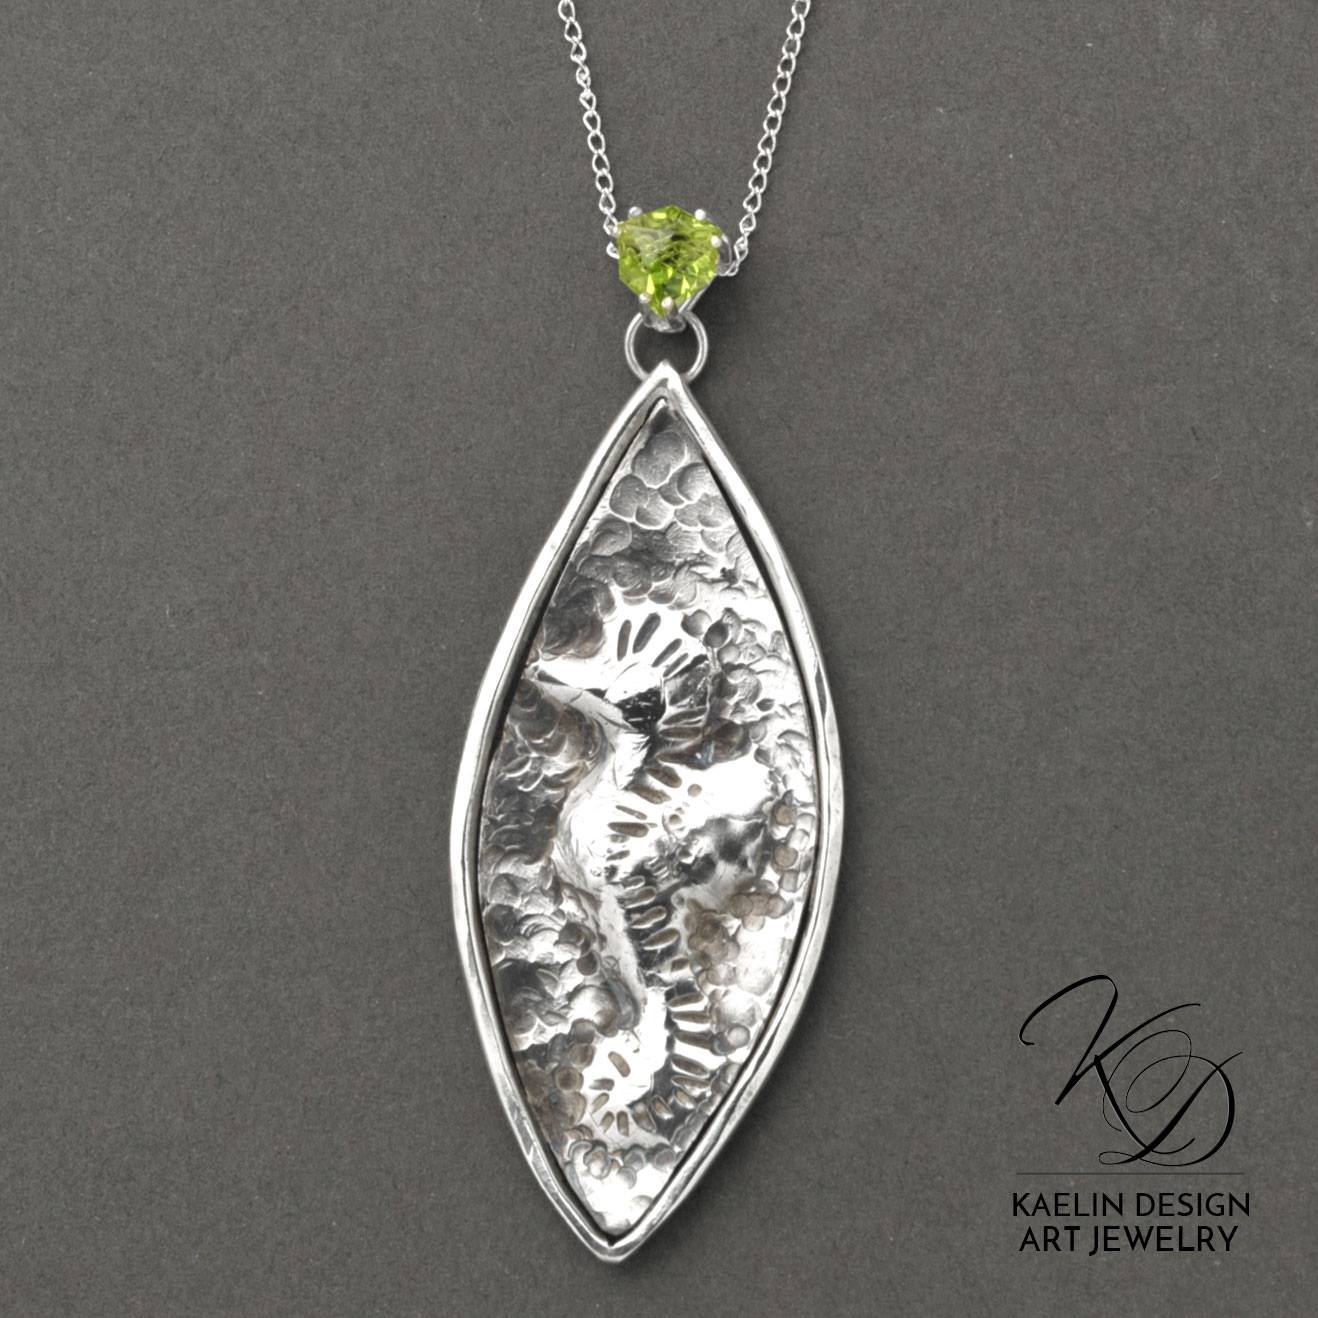 Seahorse Hand Forged Repousse Sterling Silver and Peridot Fine Art Pendant by Kaelin Design